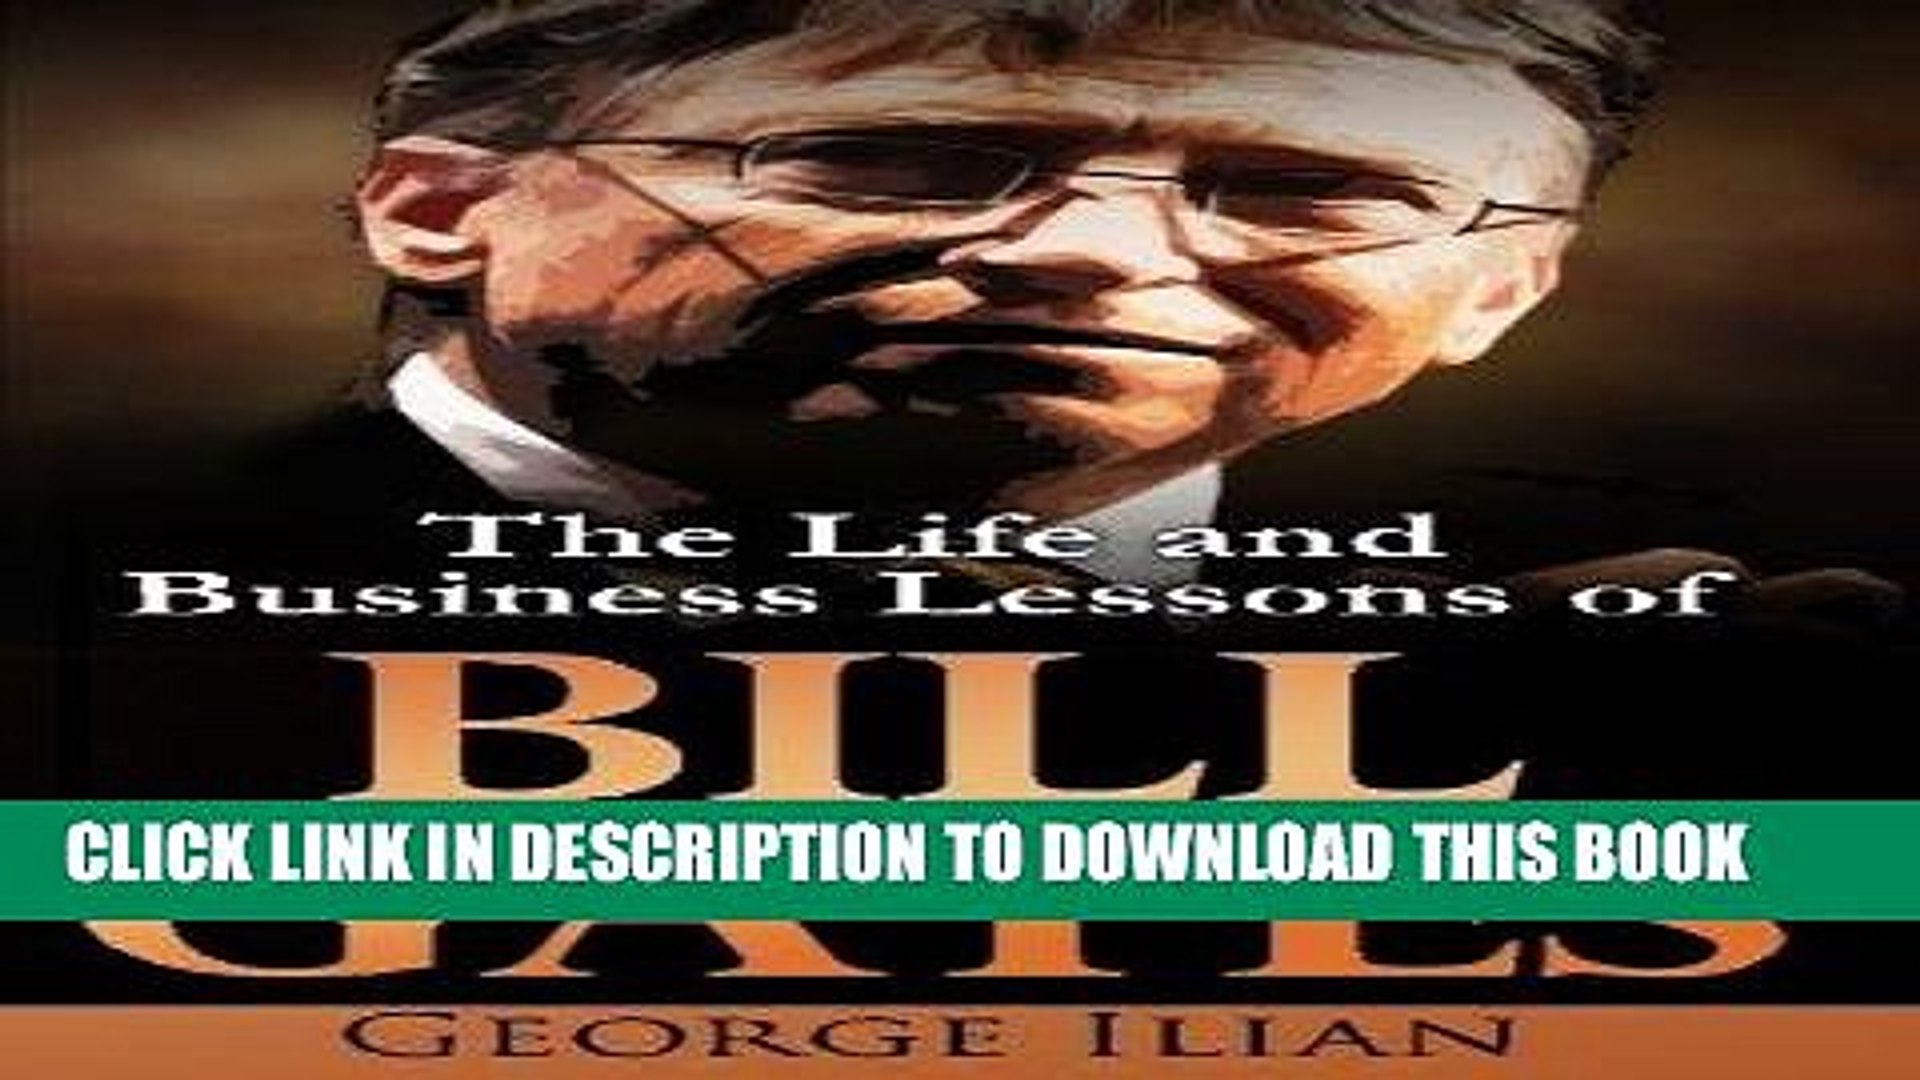 ⁣[EBOOK] DOWNLOAD Bill Gates: The Life and Business Lessons of Bill Gates GET NOW